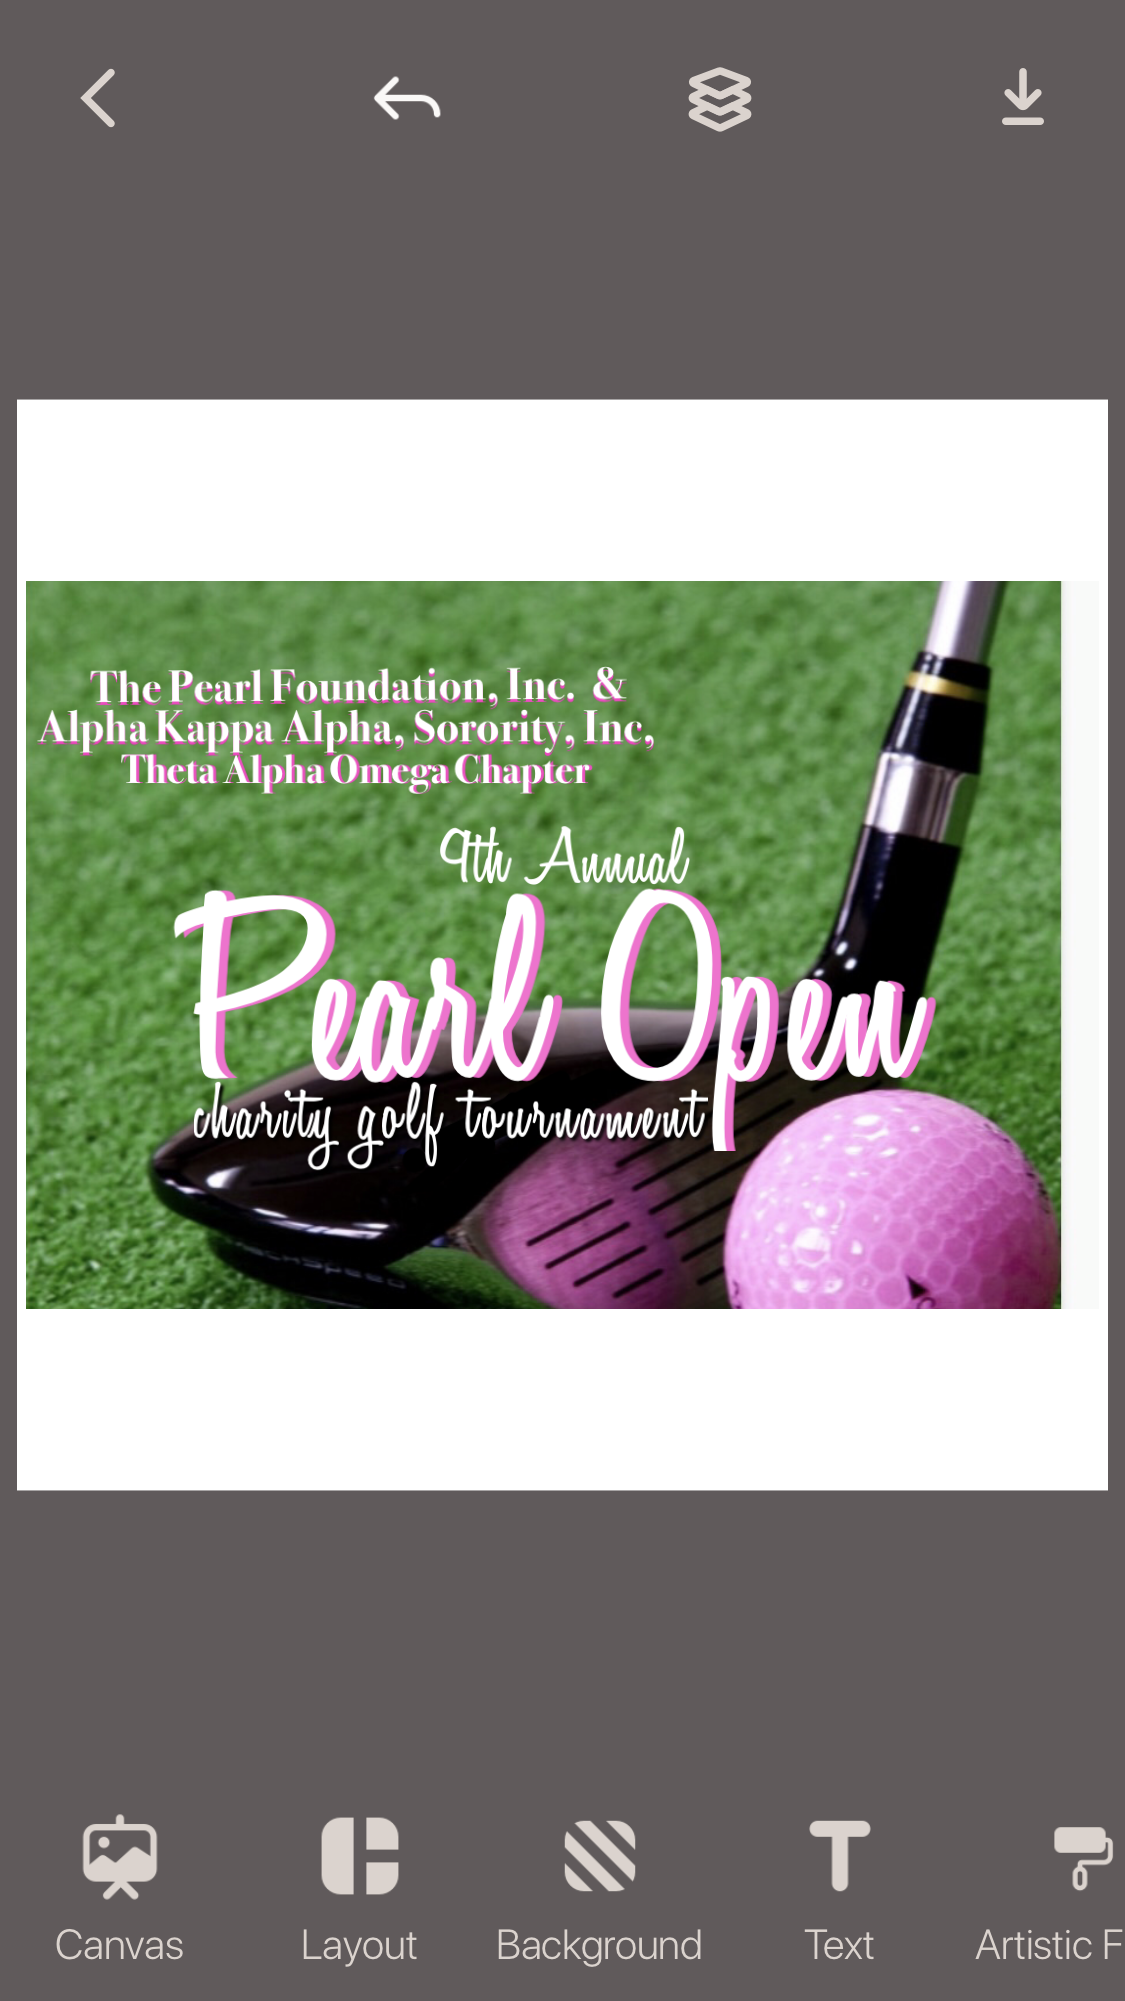 The 9th Annual Pearl Open, Charity Golf Tournament & After Party!